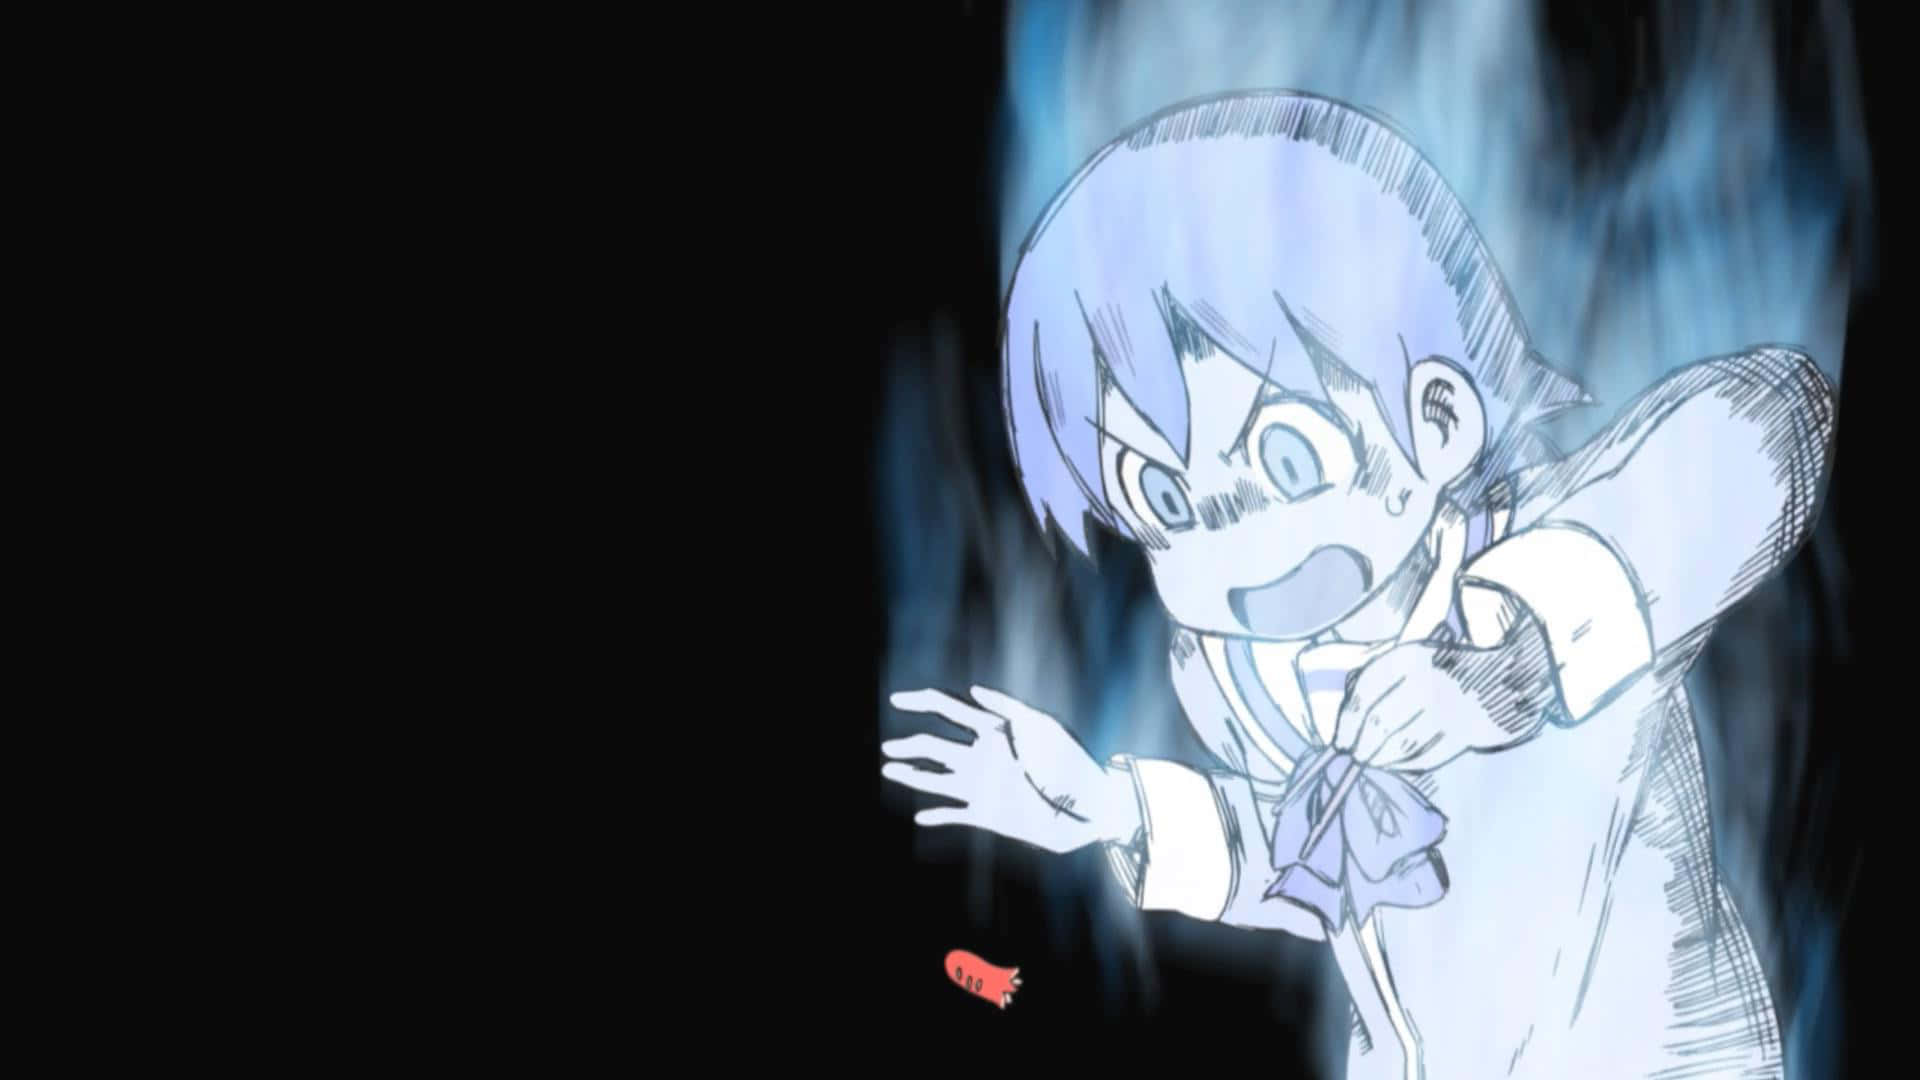 A Drawing Of A Boy With Blue Hair And Blue Flames Wallpaper